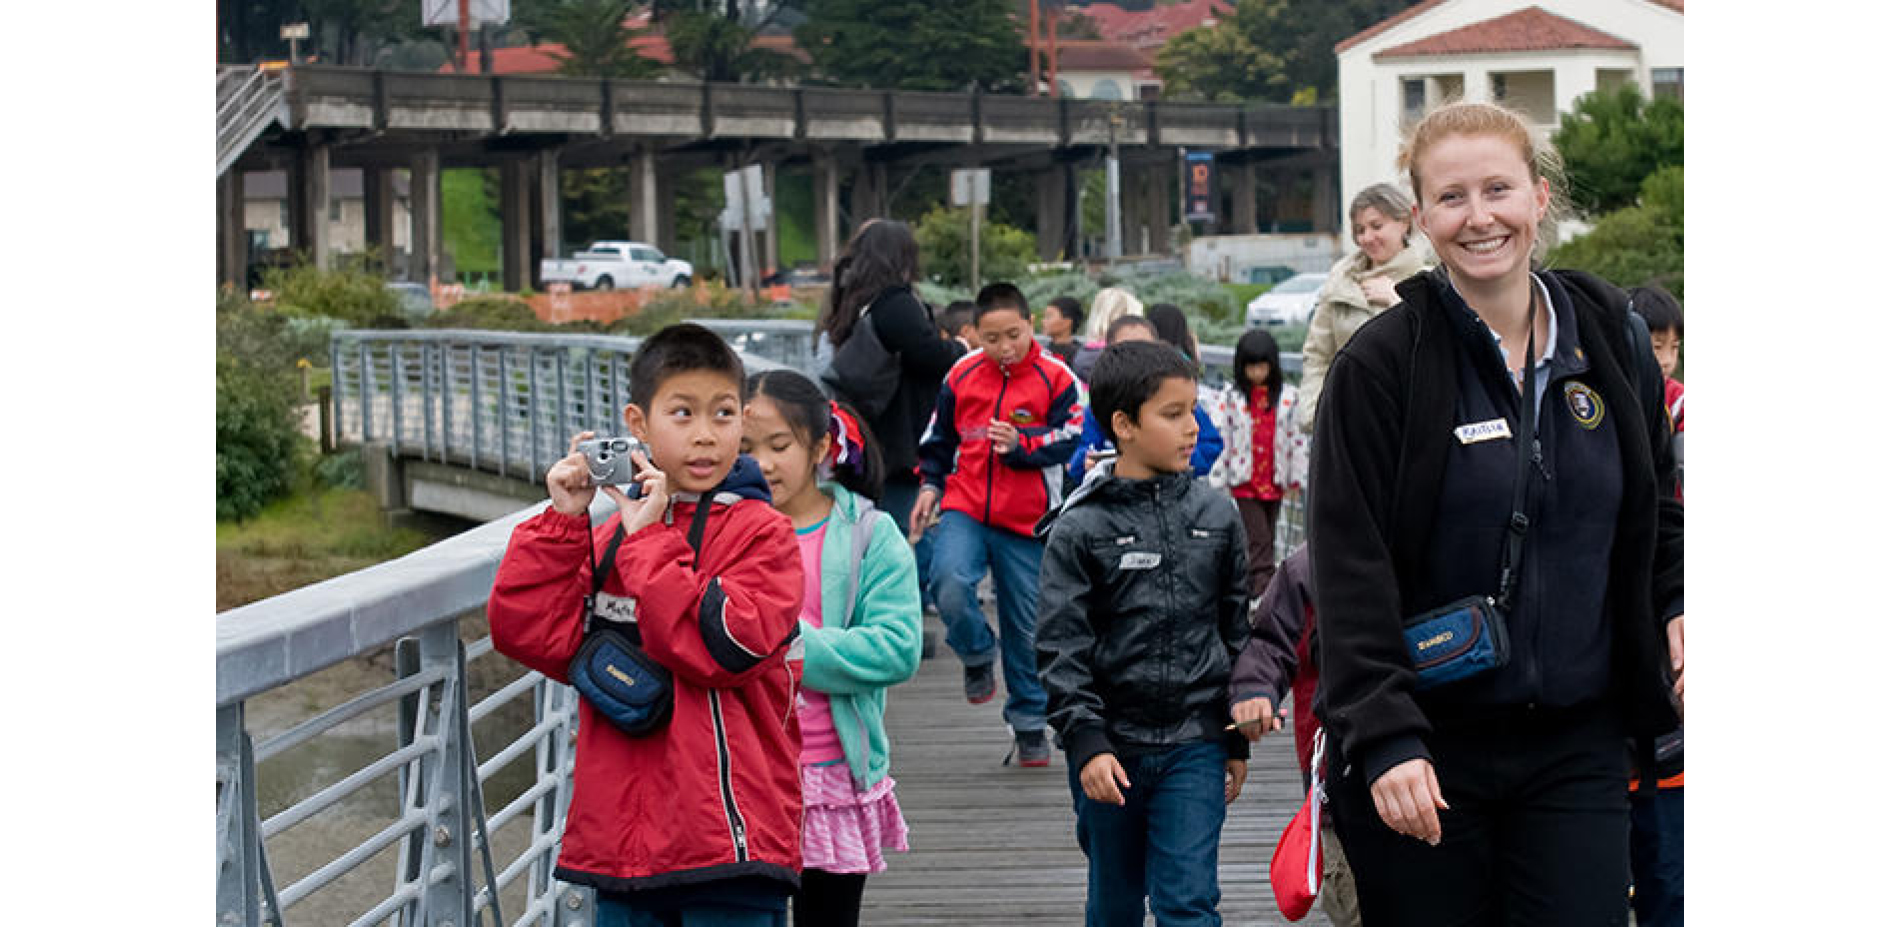 The park hosts youth programs for over 70 Bay Area schools.